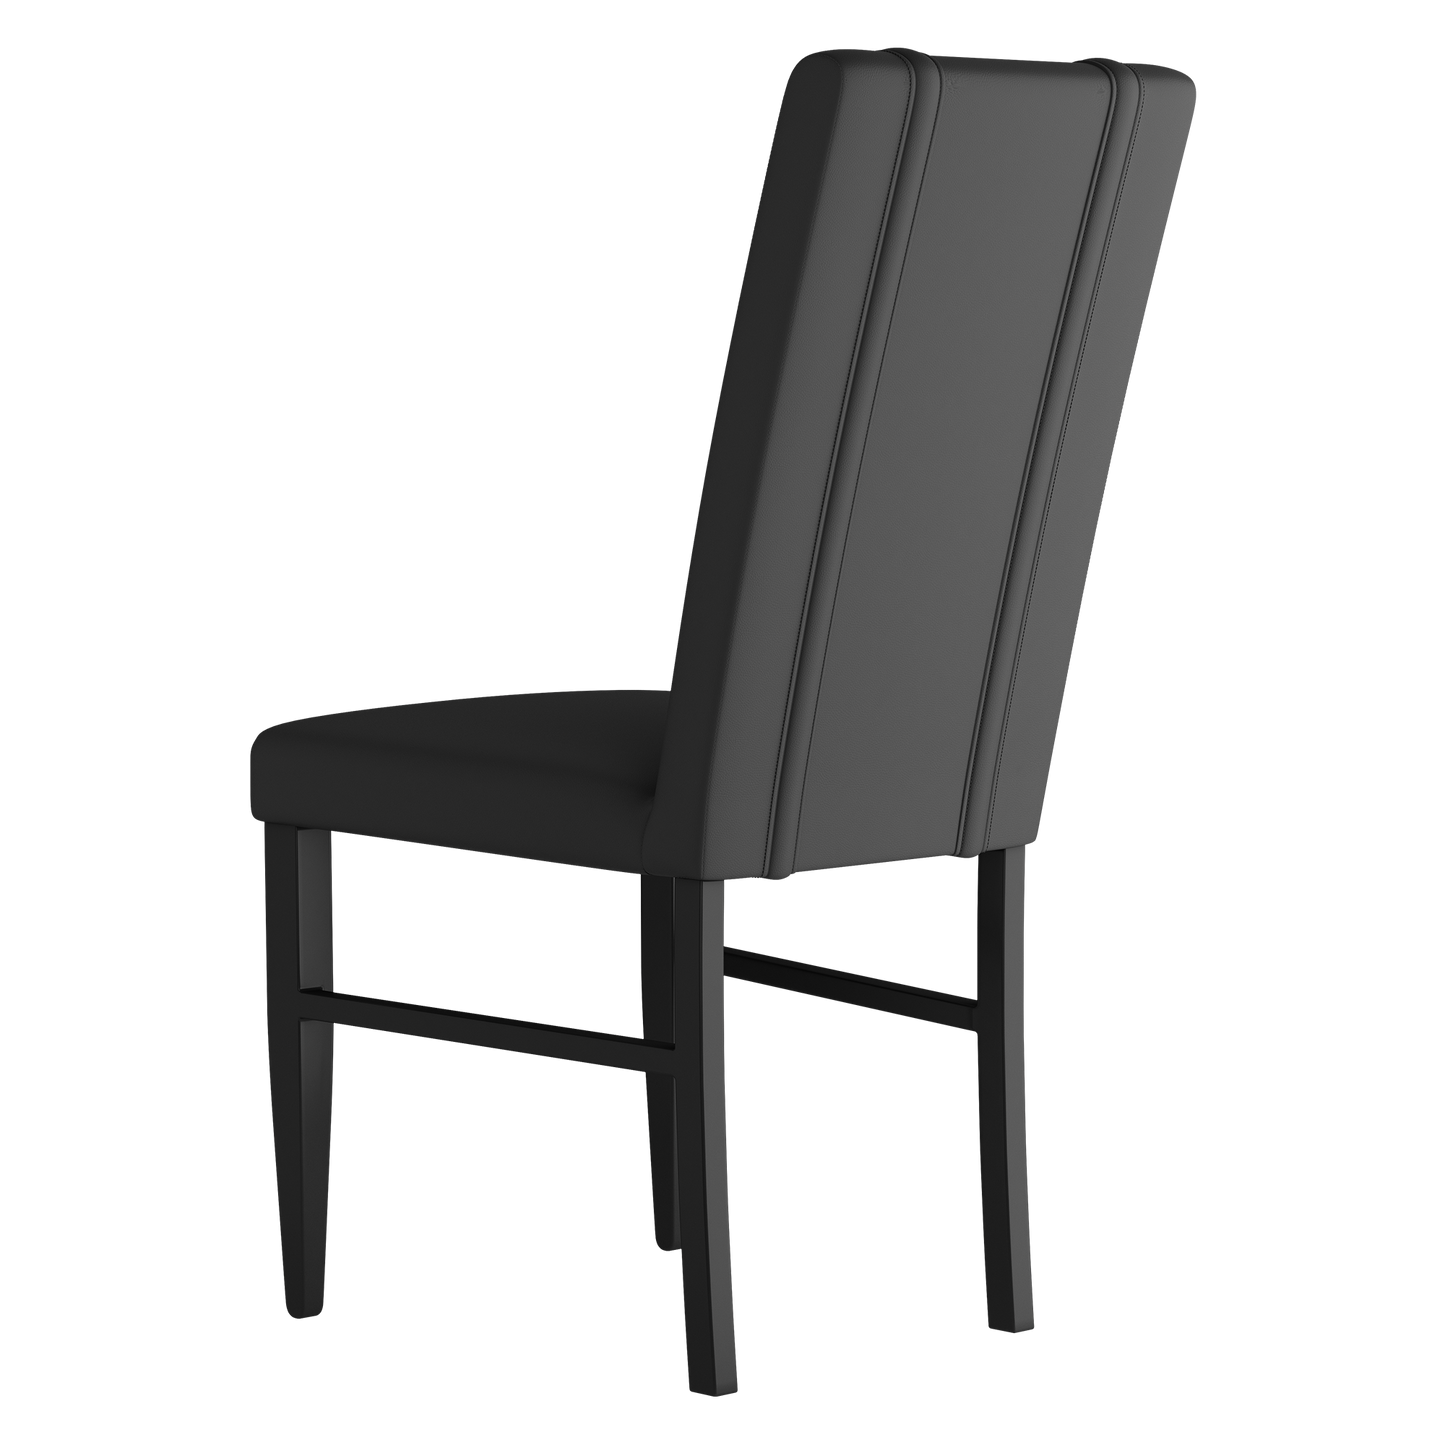 Side Chair 2000 with Iguana Logo Panel Set of 2